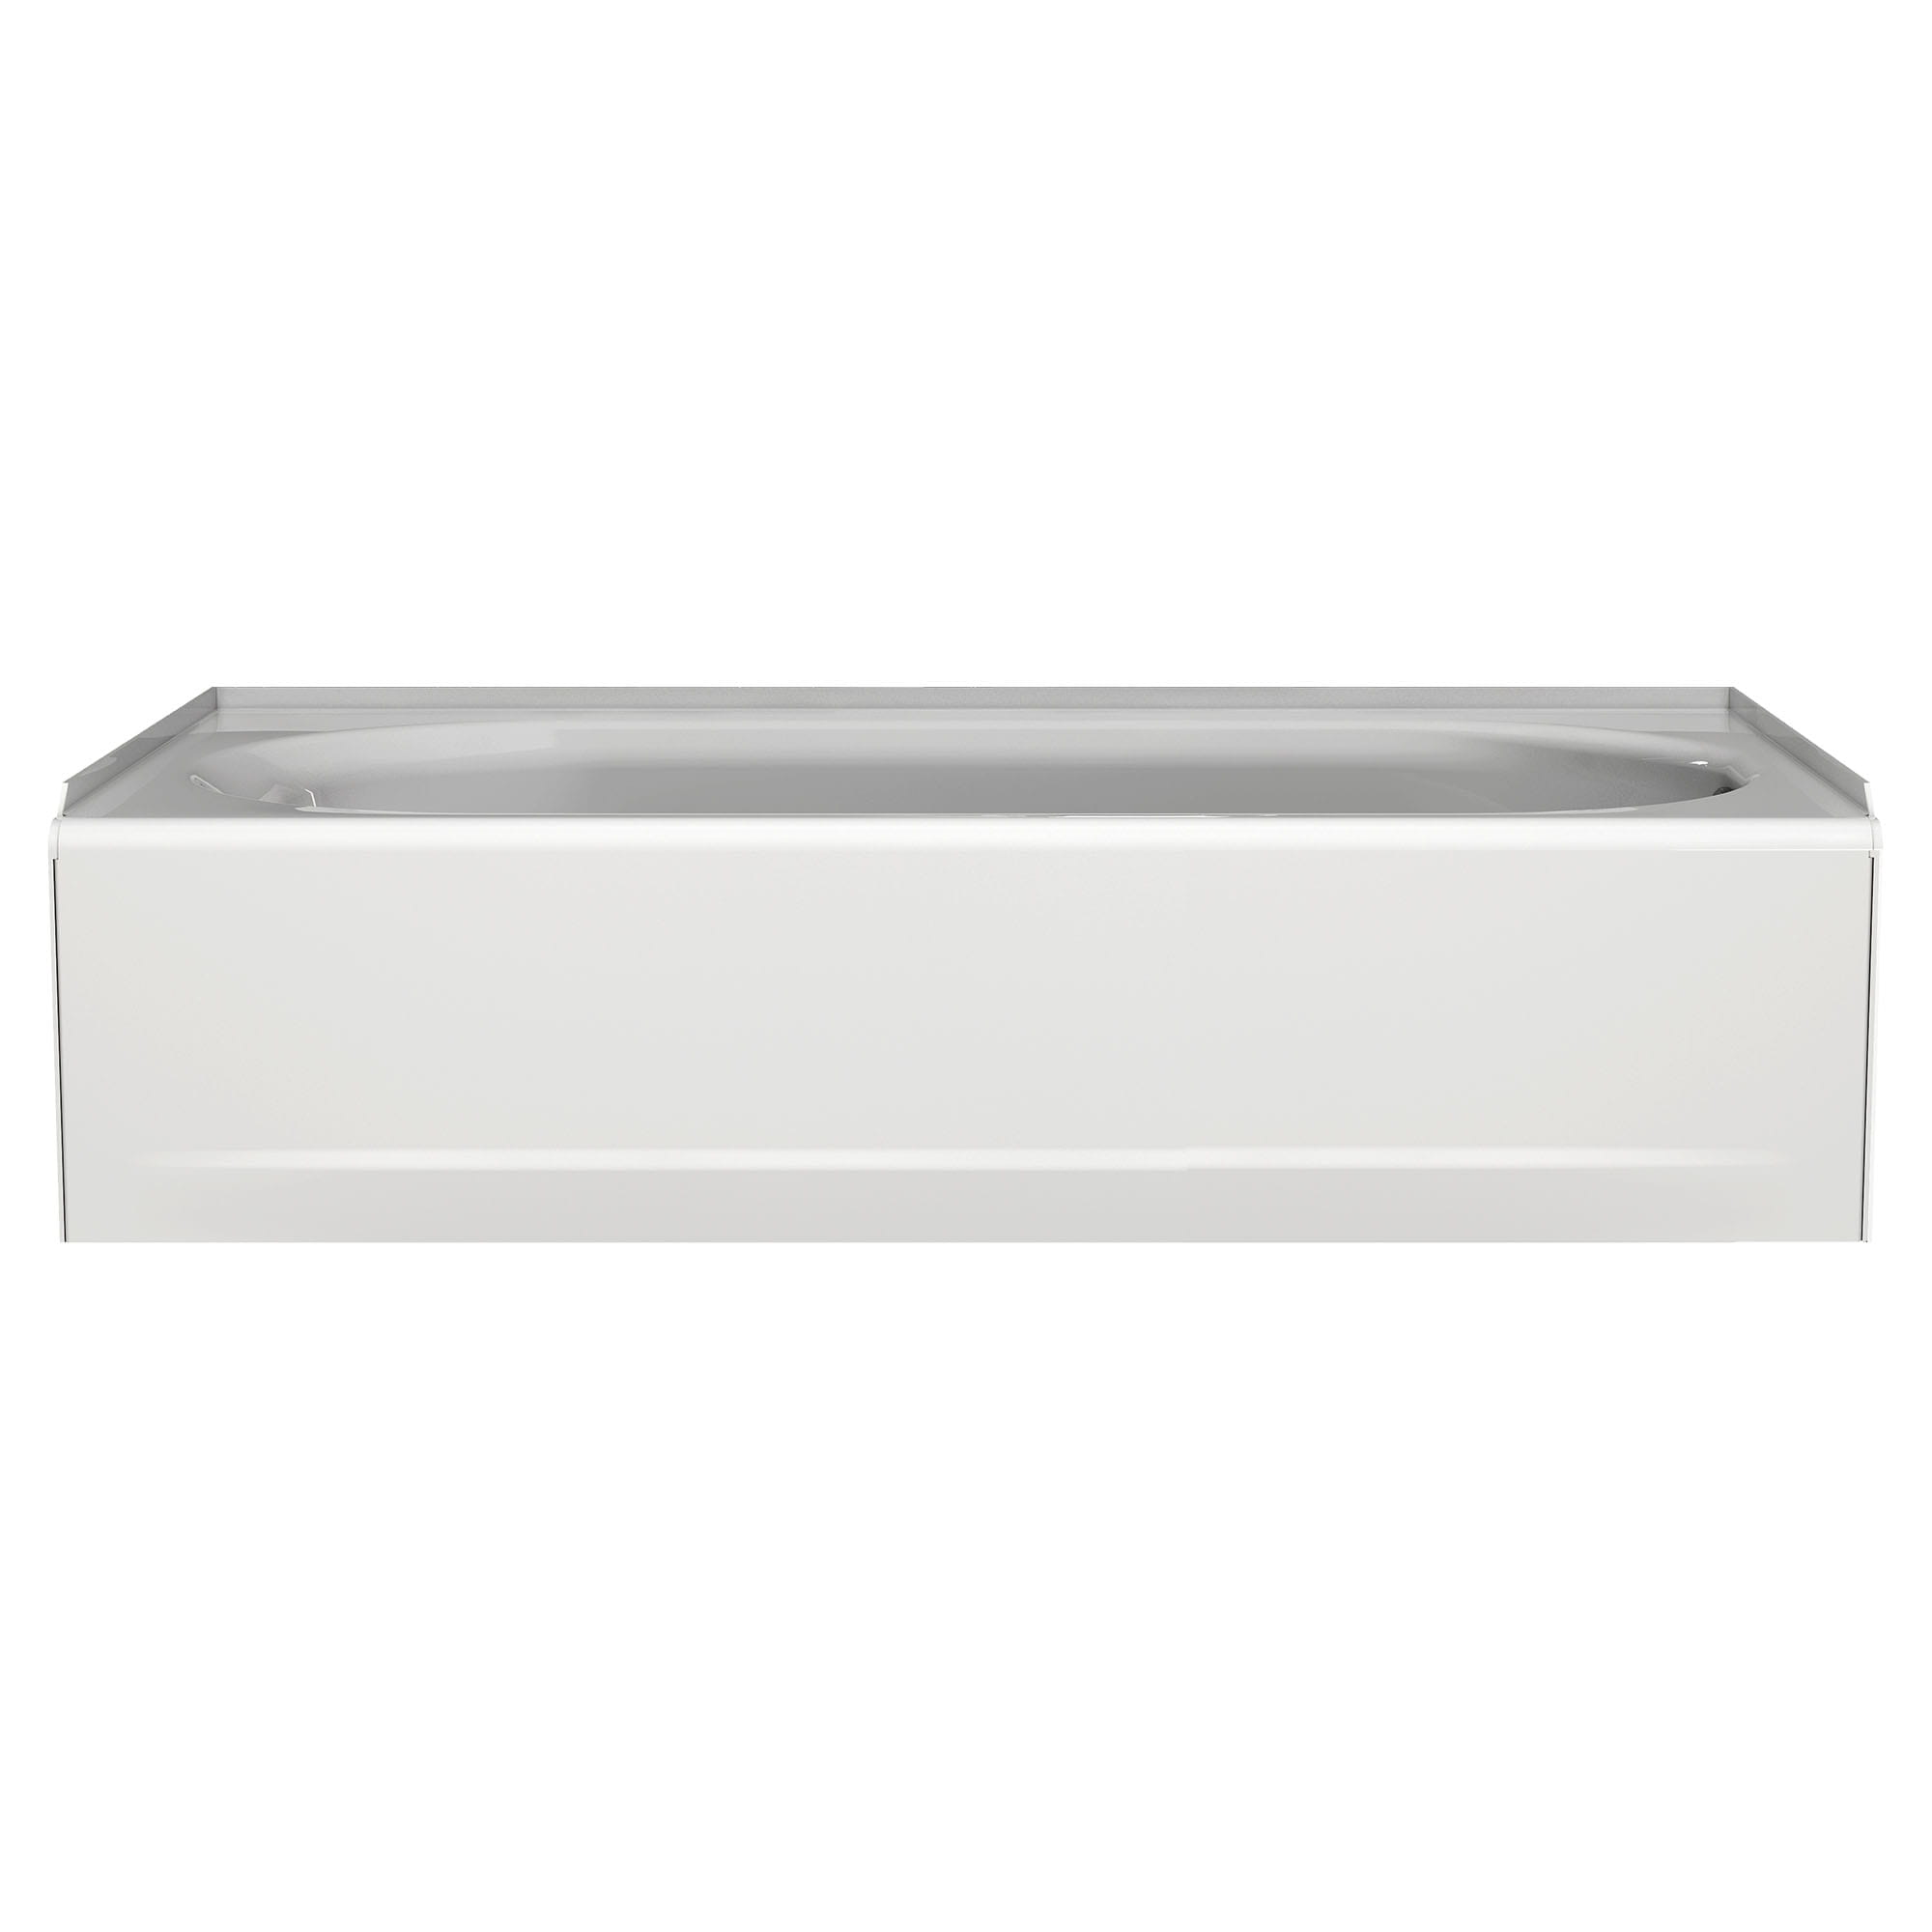 Princeton Americast 60 x 34 Inch Integral Apron Bathtub Above Floor Rough Left Hand Outlet Luxury Ledge with Integral Drain WHITE